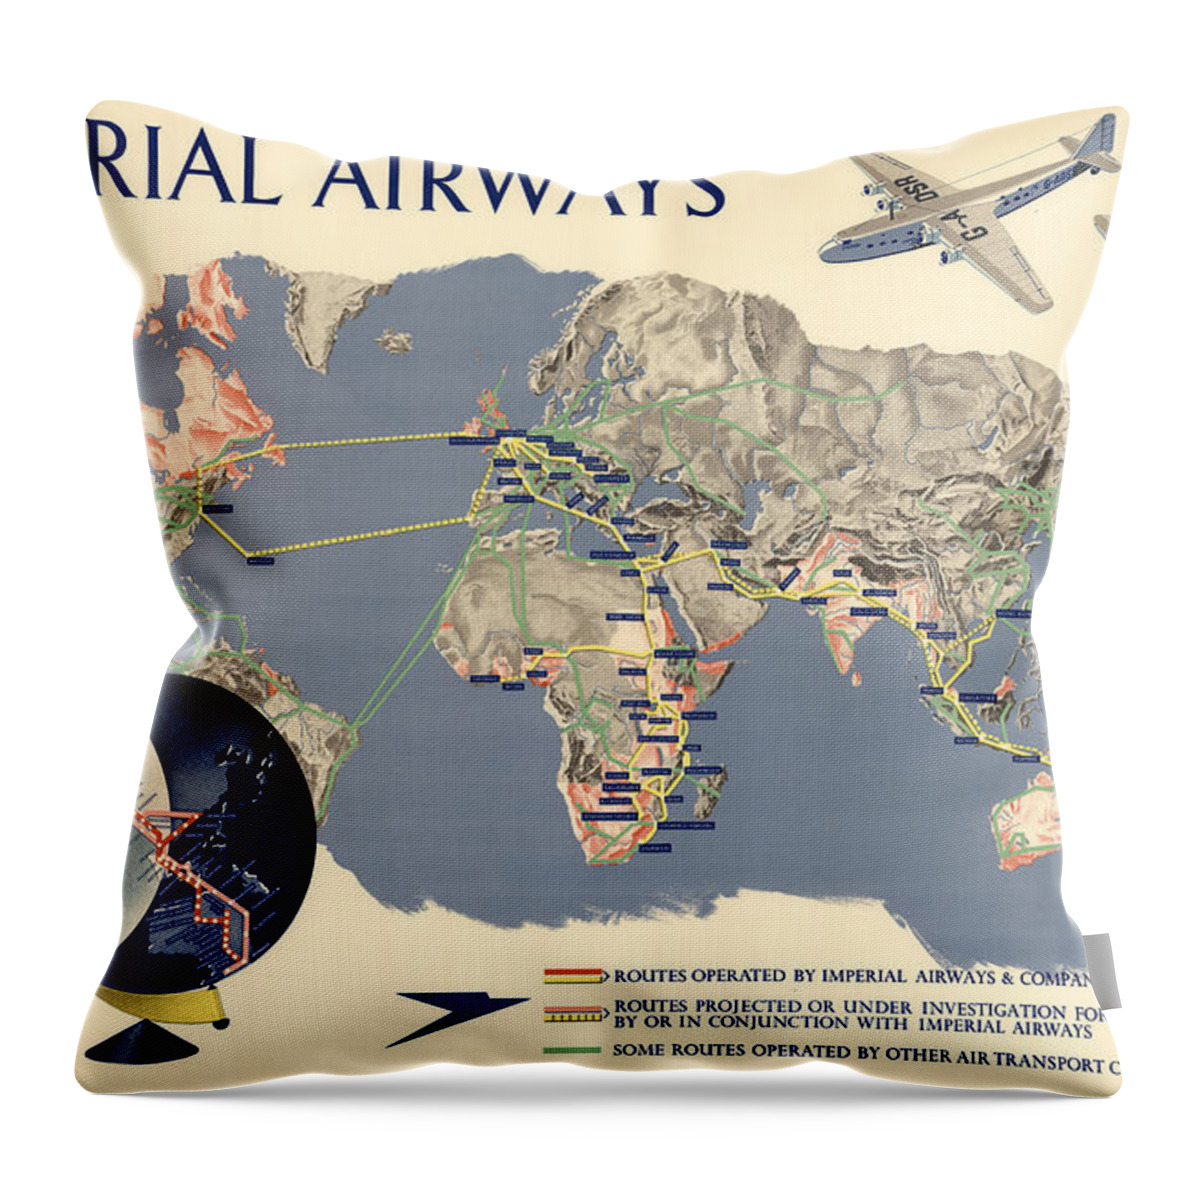 Imperial Airways Throw Pillow featuring the mixed media Imperial Airways - Vintage Travel Advertising Poster - World Map by Studio Grafiikka